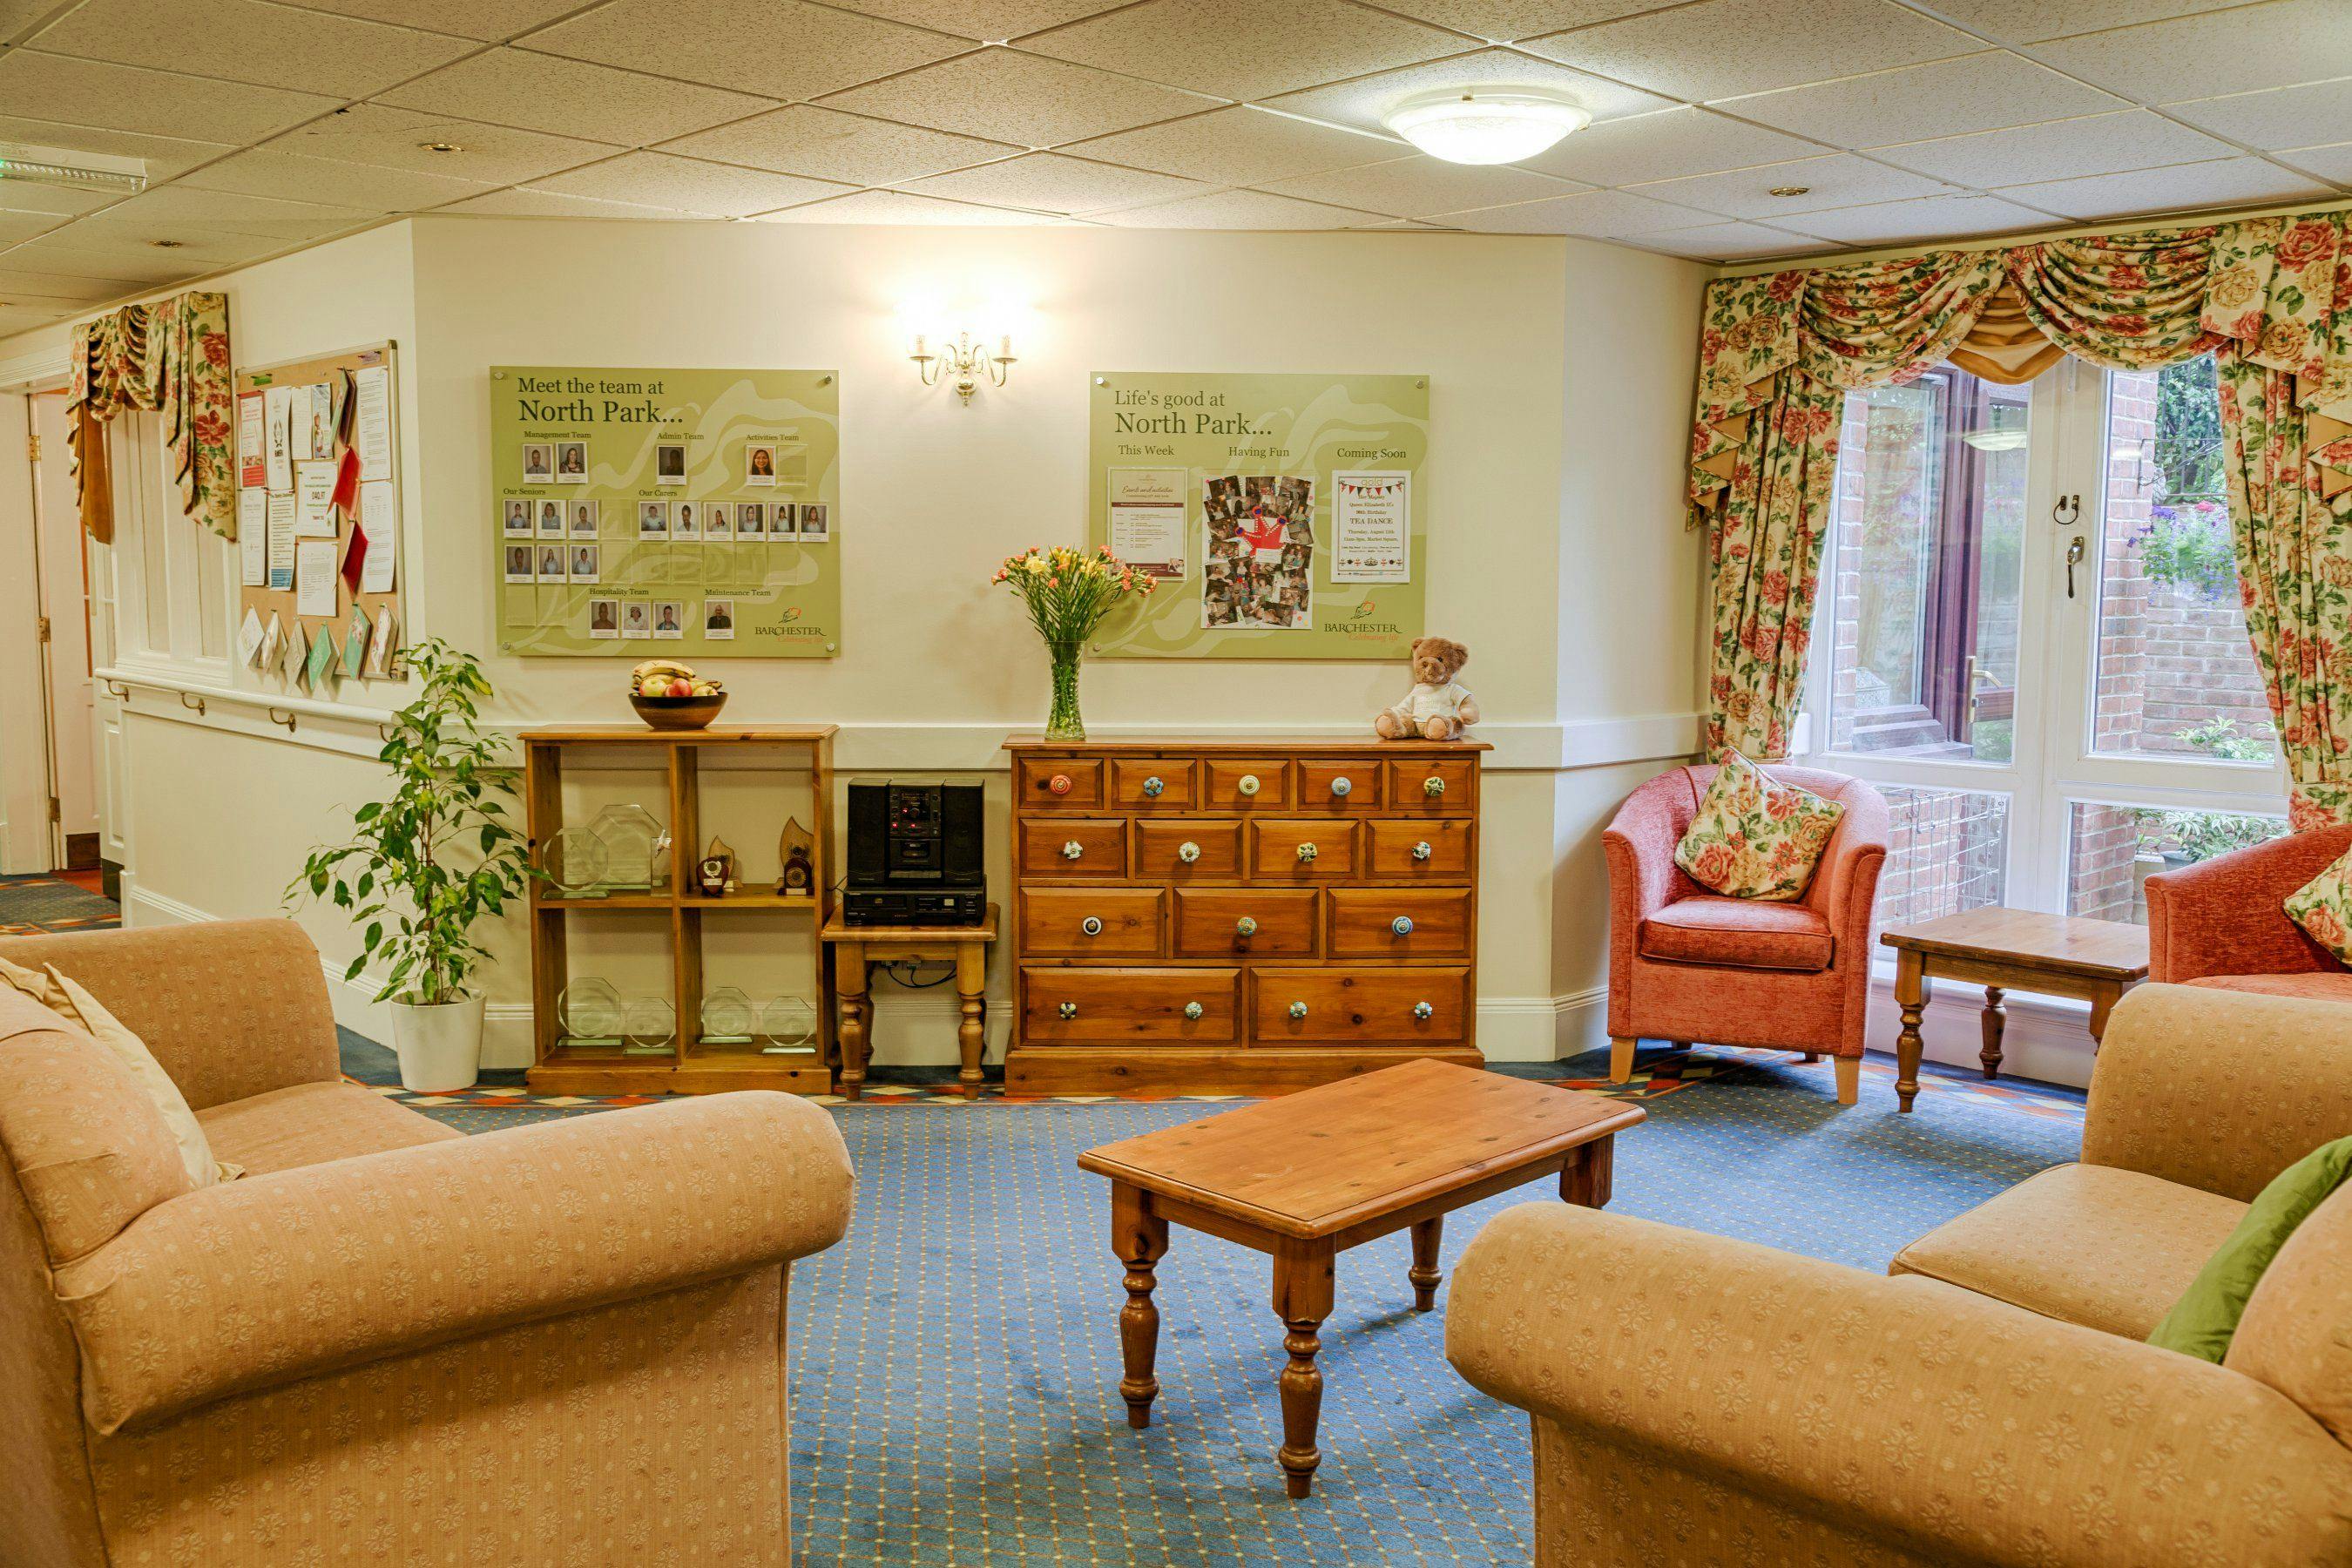 The Communal Lounge at North Park Care Home in Darlington, North East England